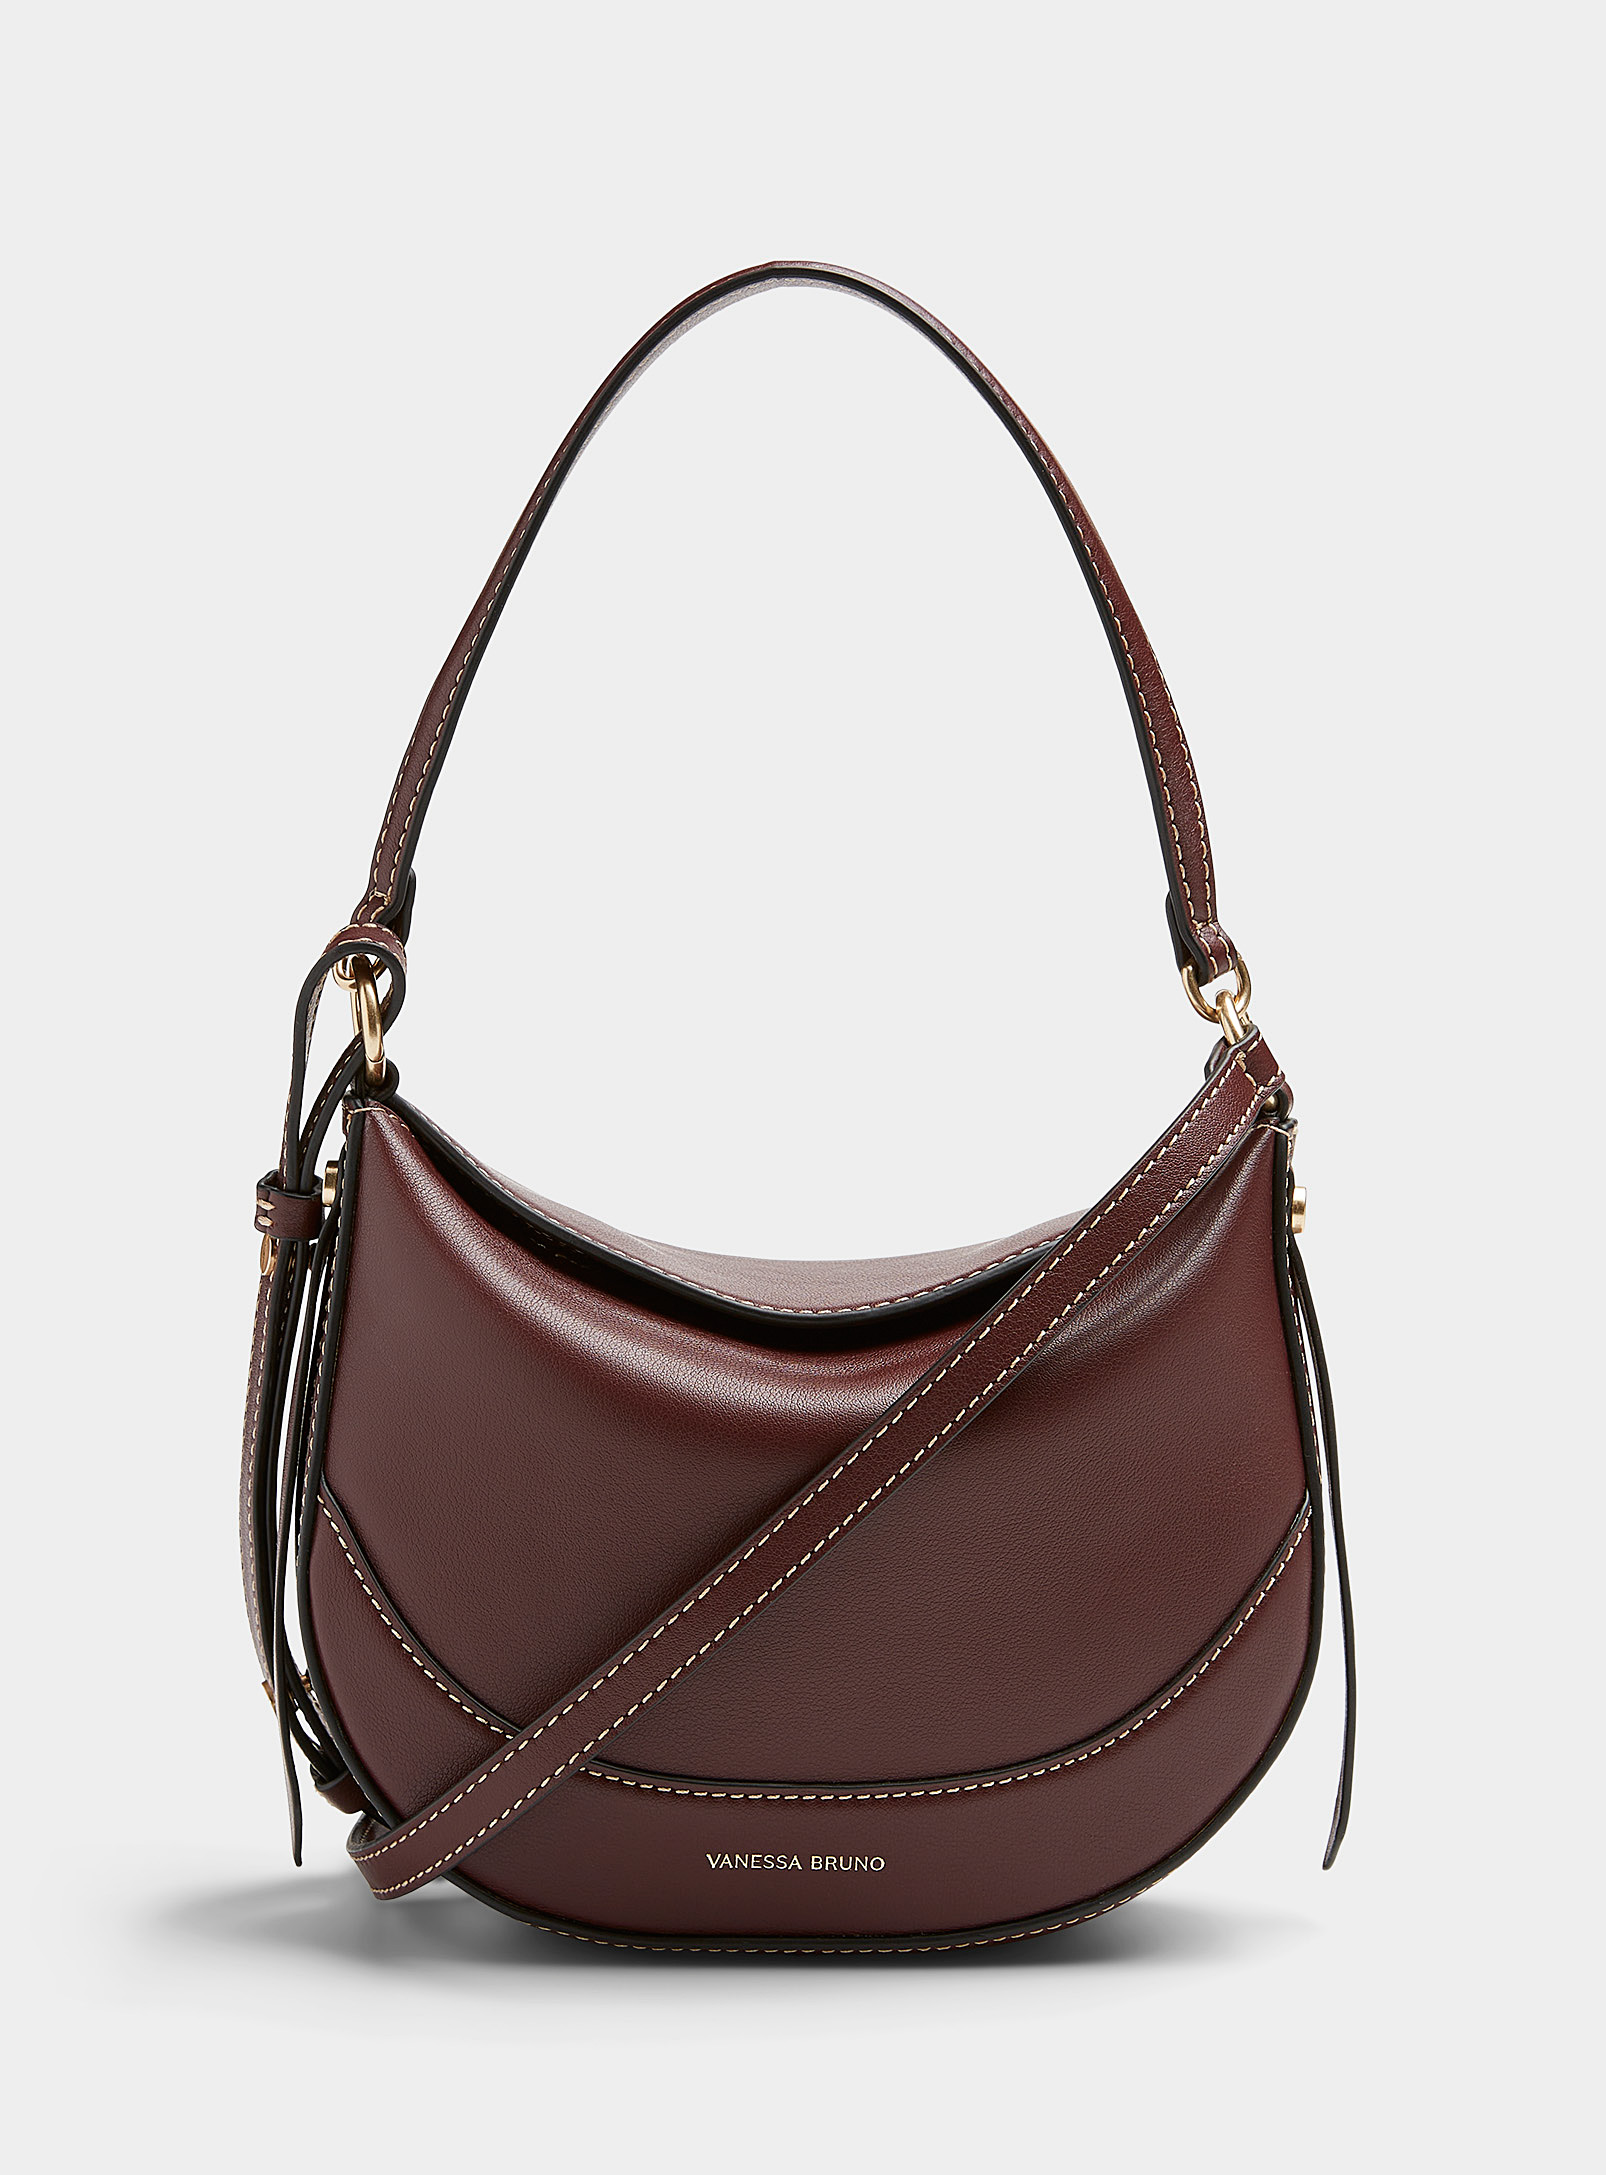 VANESSA BRUNO DAILY SMALL GRAINED LEATHER BAG